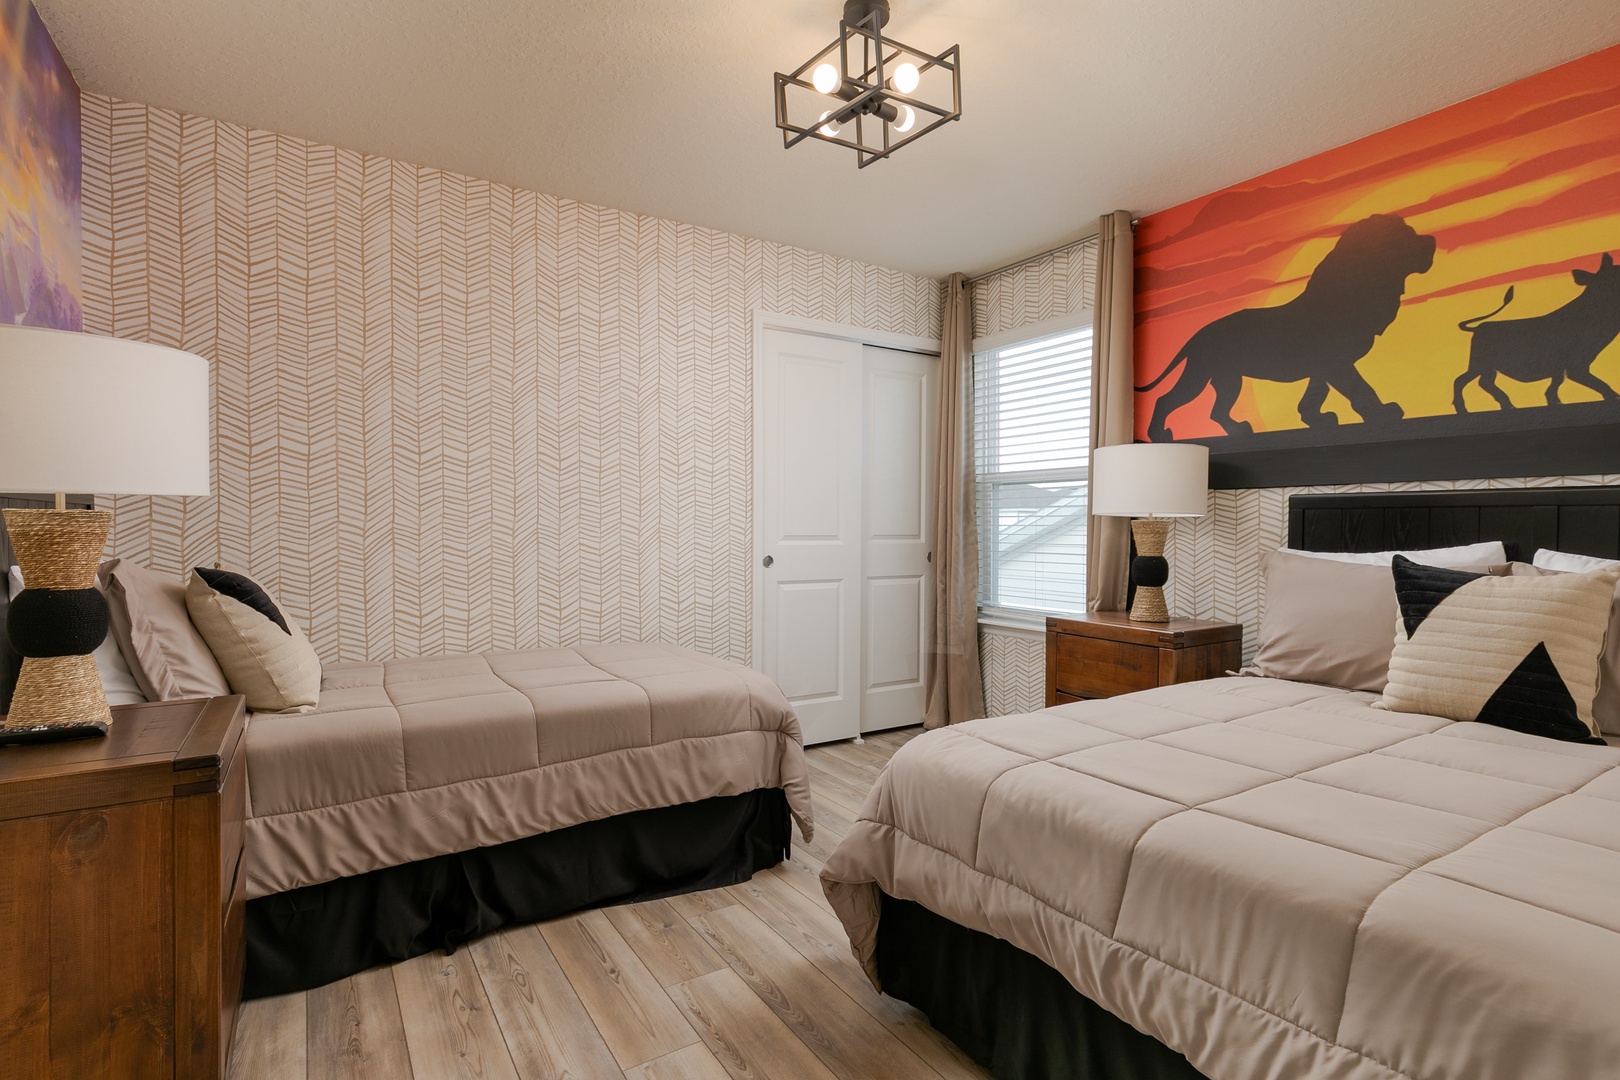 This 2nd floor bedroom offers 2 beds (1 twin & 1 full), and a Smart TV – no worries!